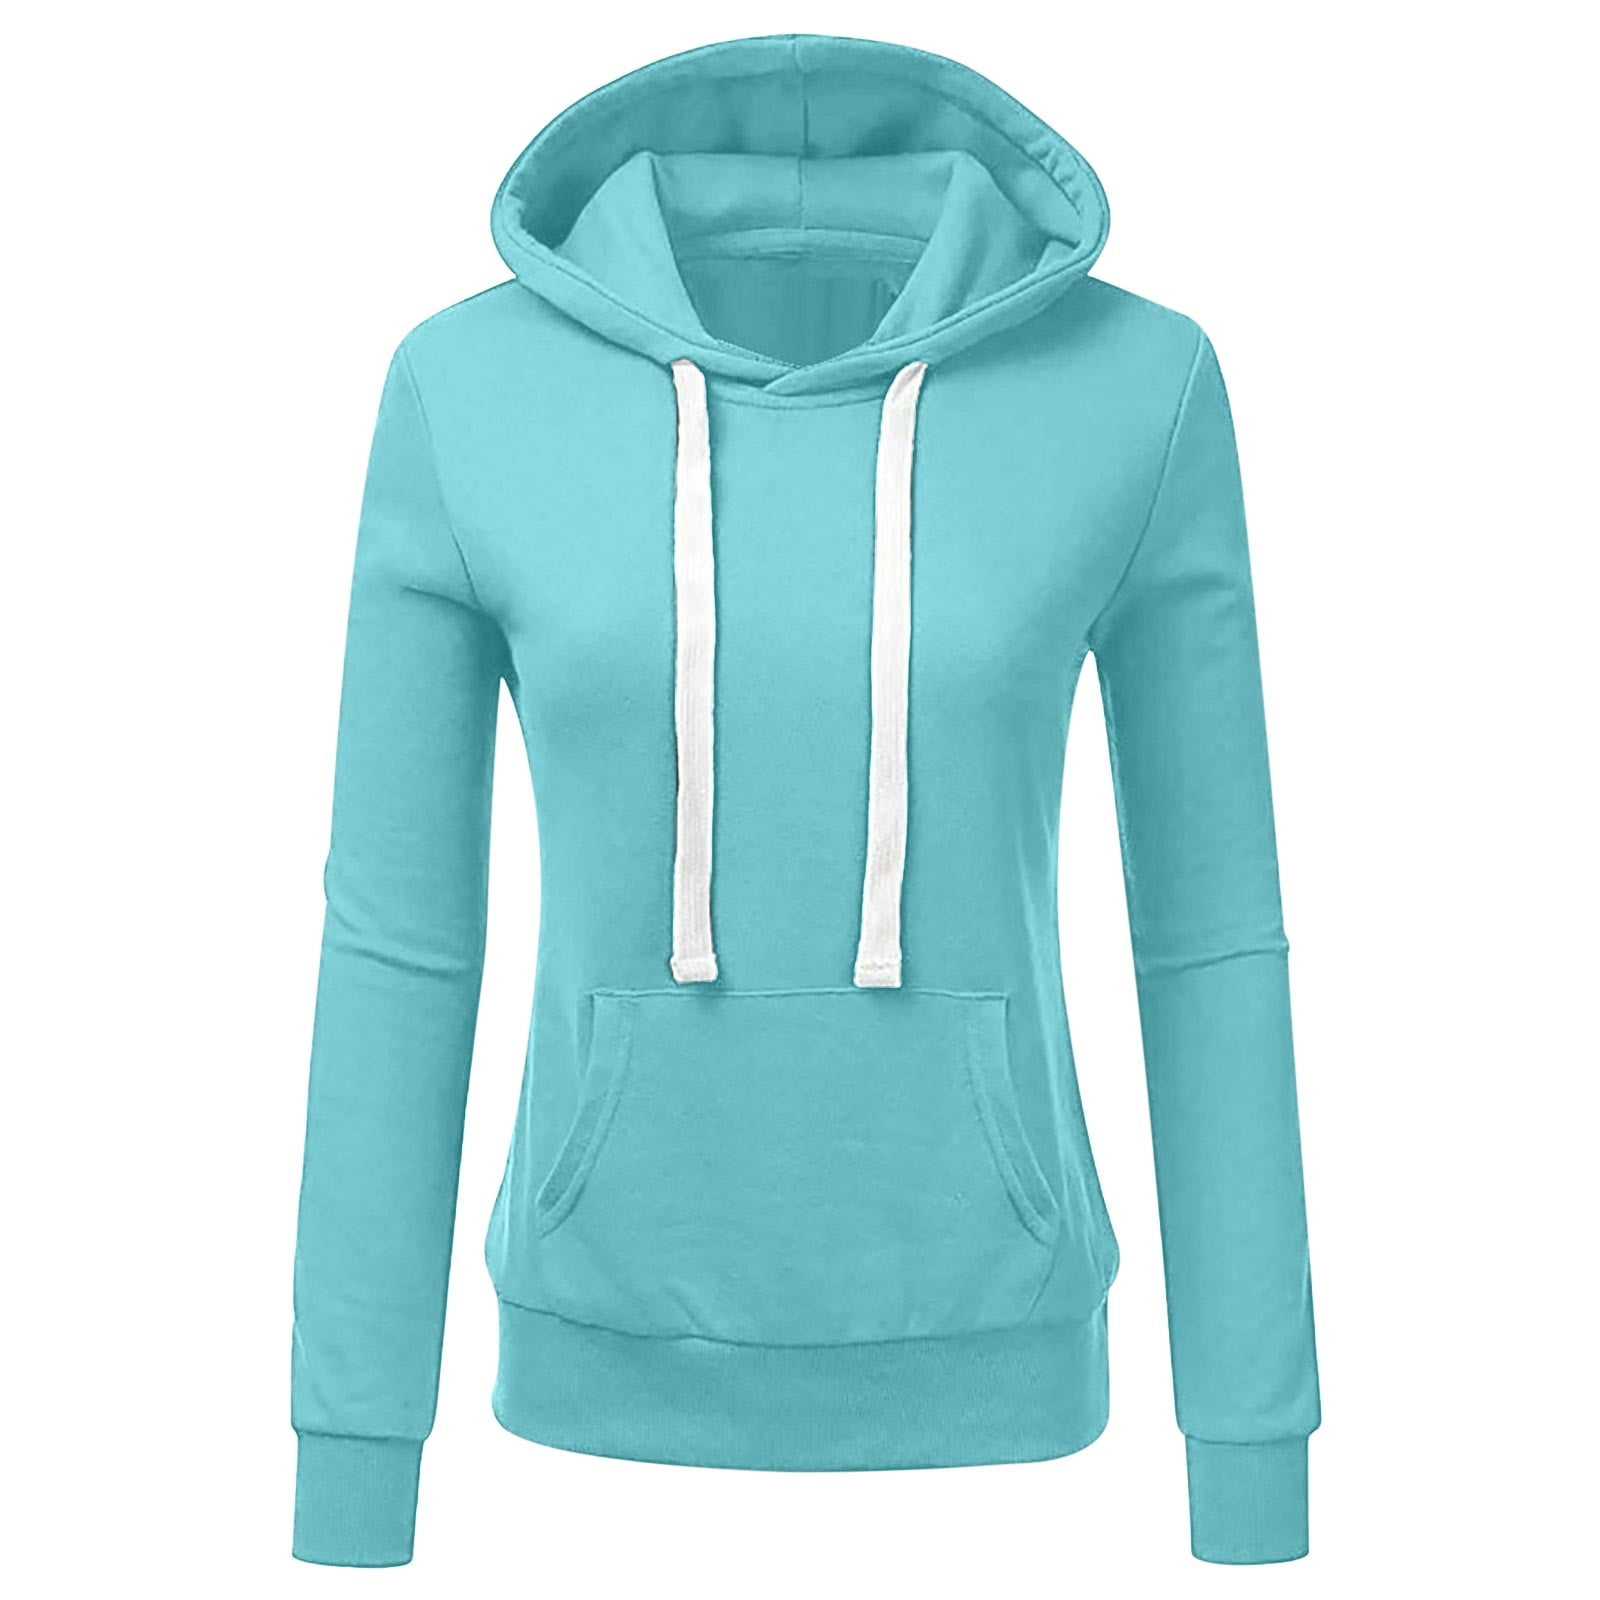 Up to 65% off! - Fatuov Women Sweatshirt Solid Color Clearance with ...